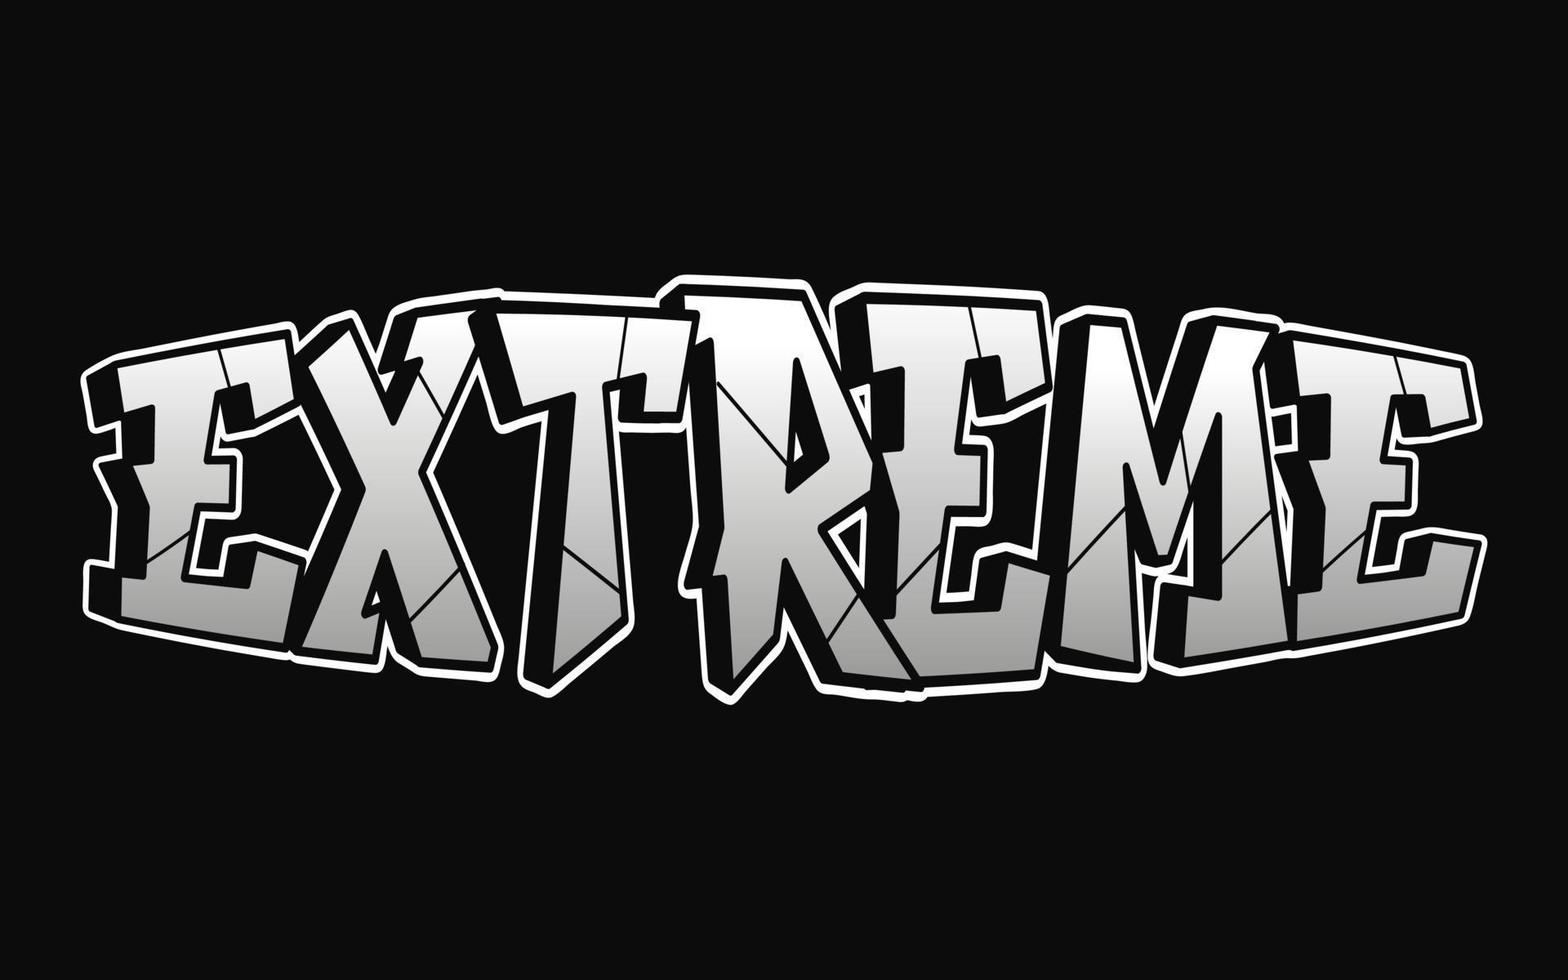 Extreme word graffiti style letters.Vector hand drawn doodle cartoon logo illustration.Funny cool extreme letters, fashion, graffiti style print for t-shirt, poster concept vector